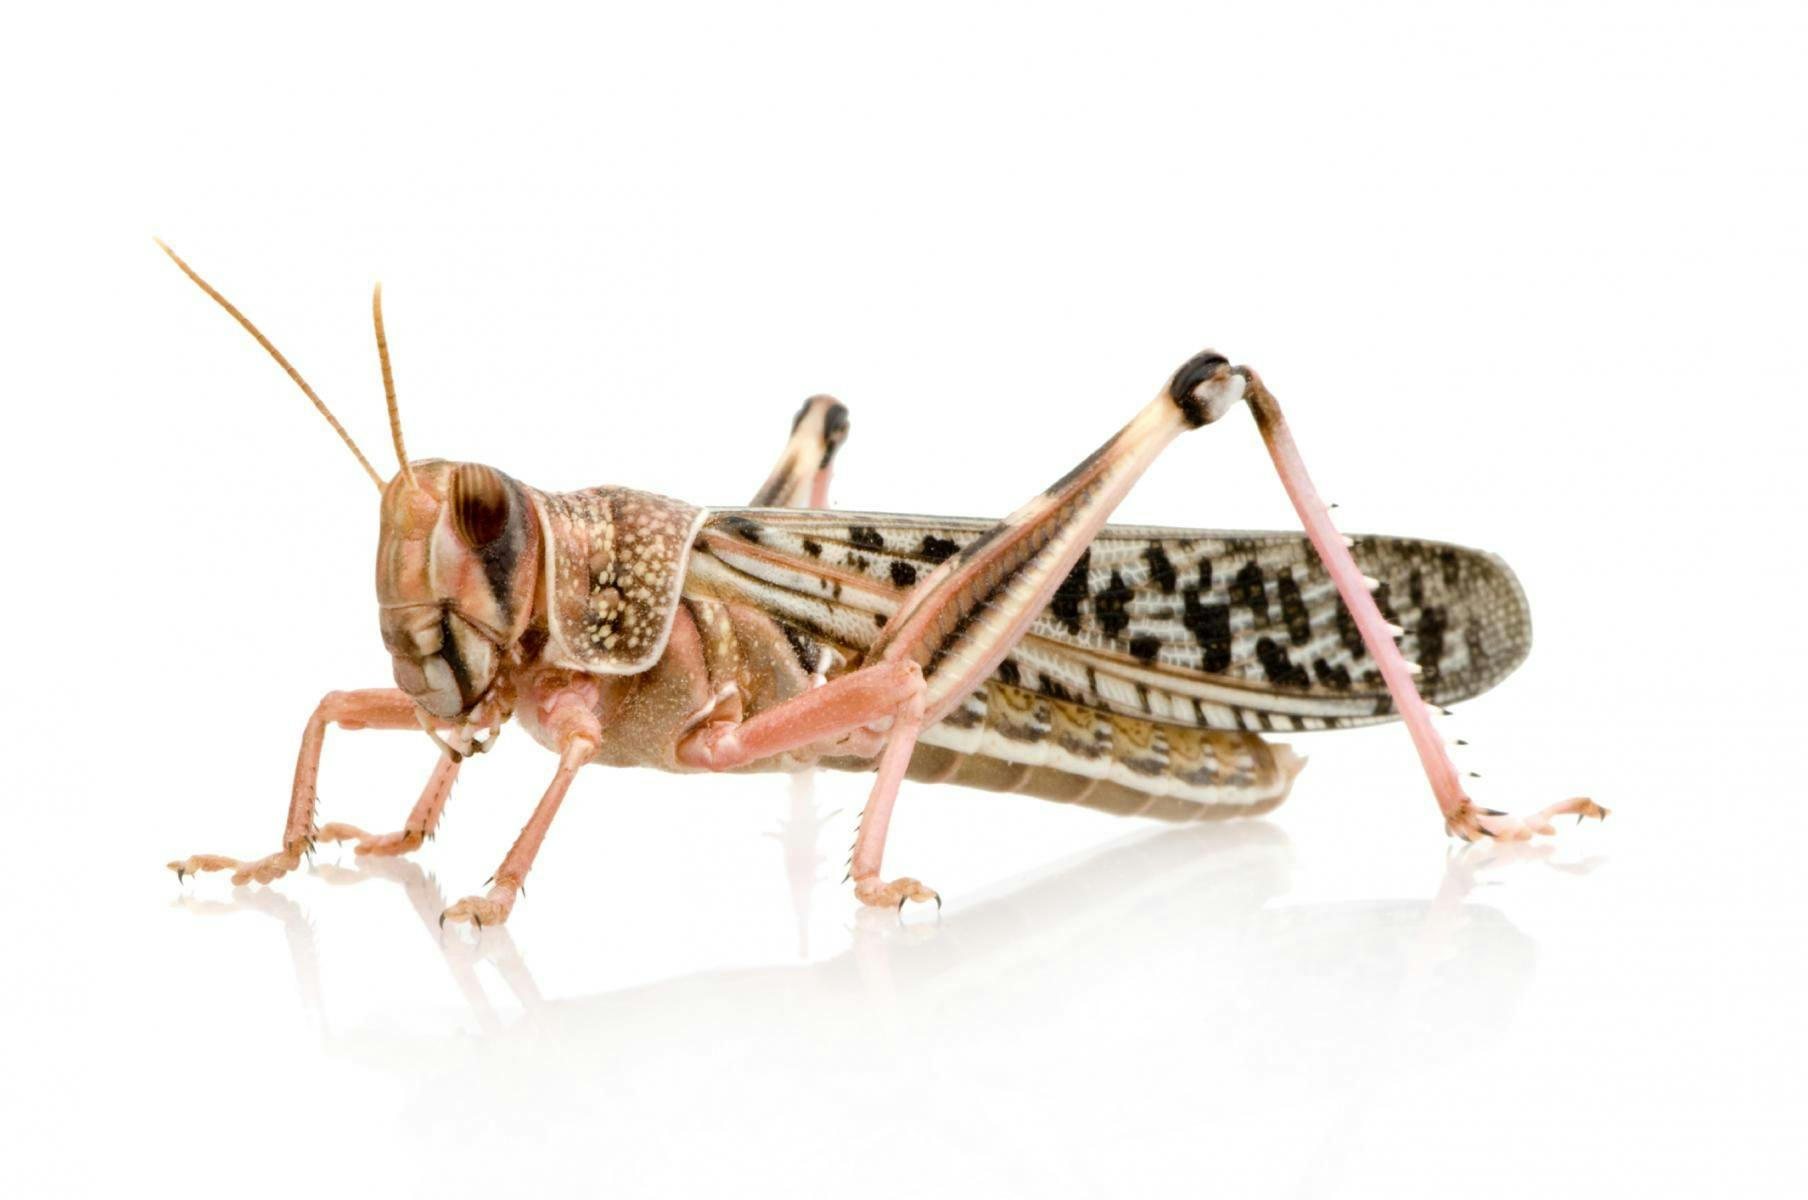 Ready to Eat Insects: Locusts